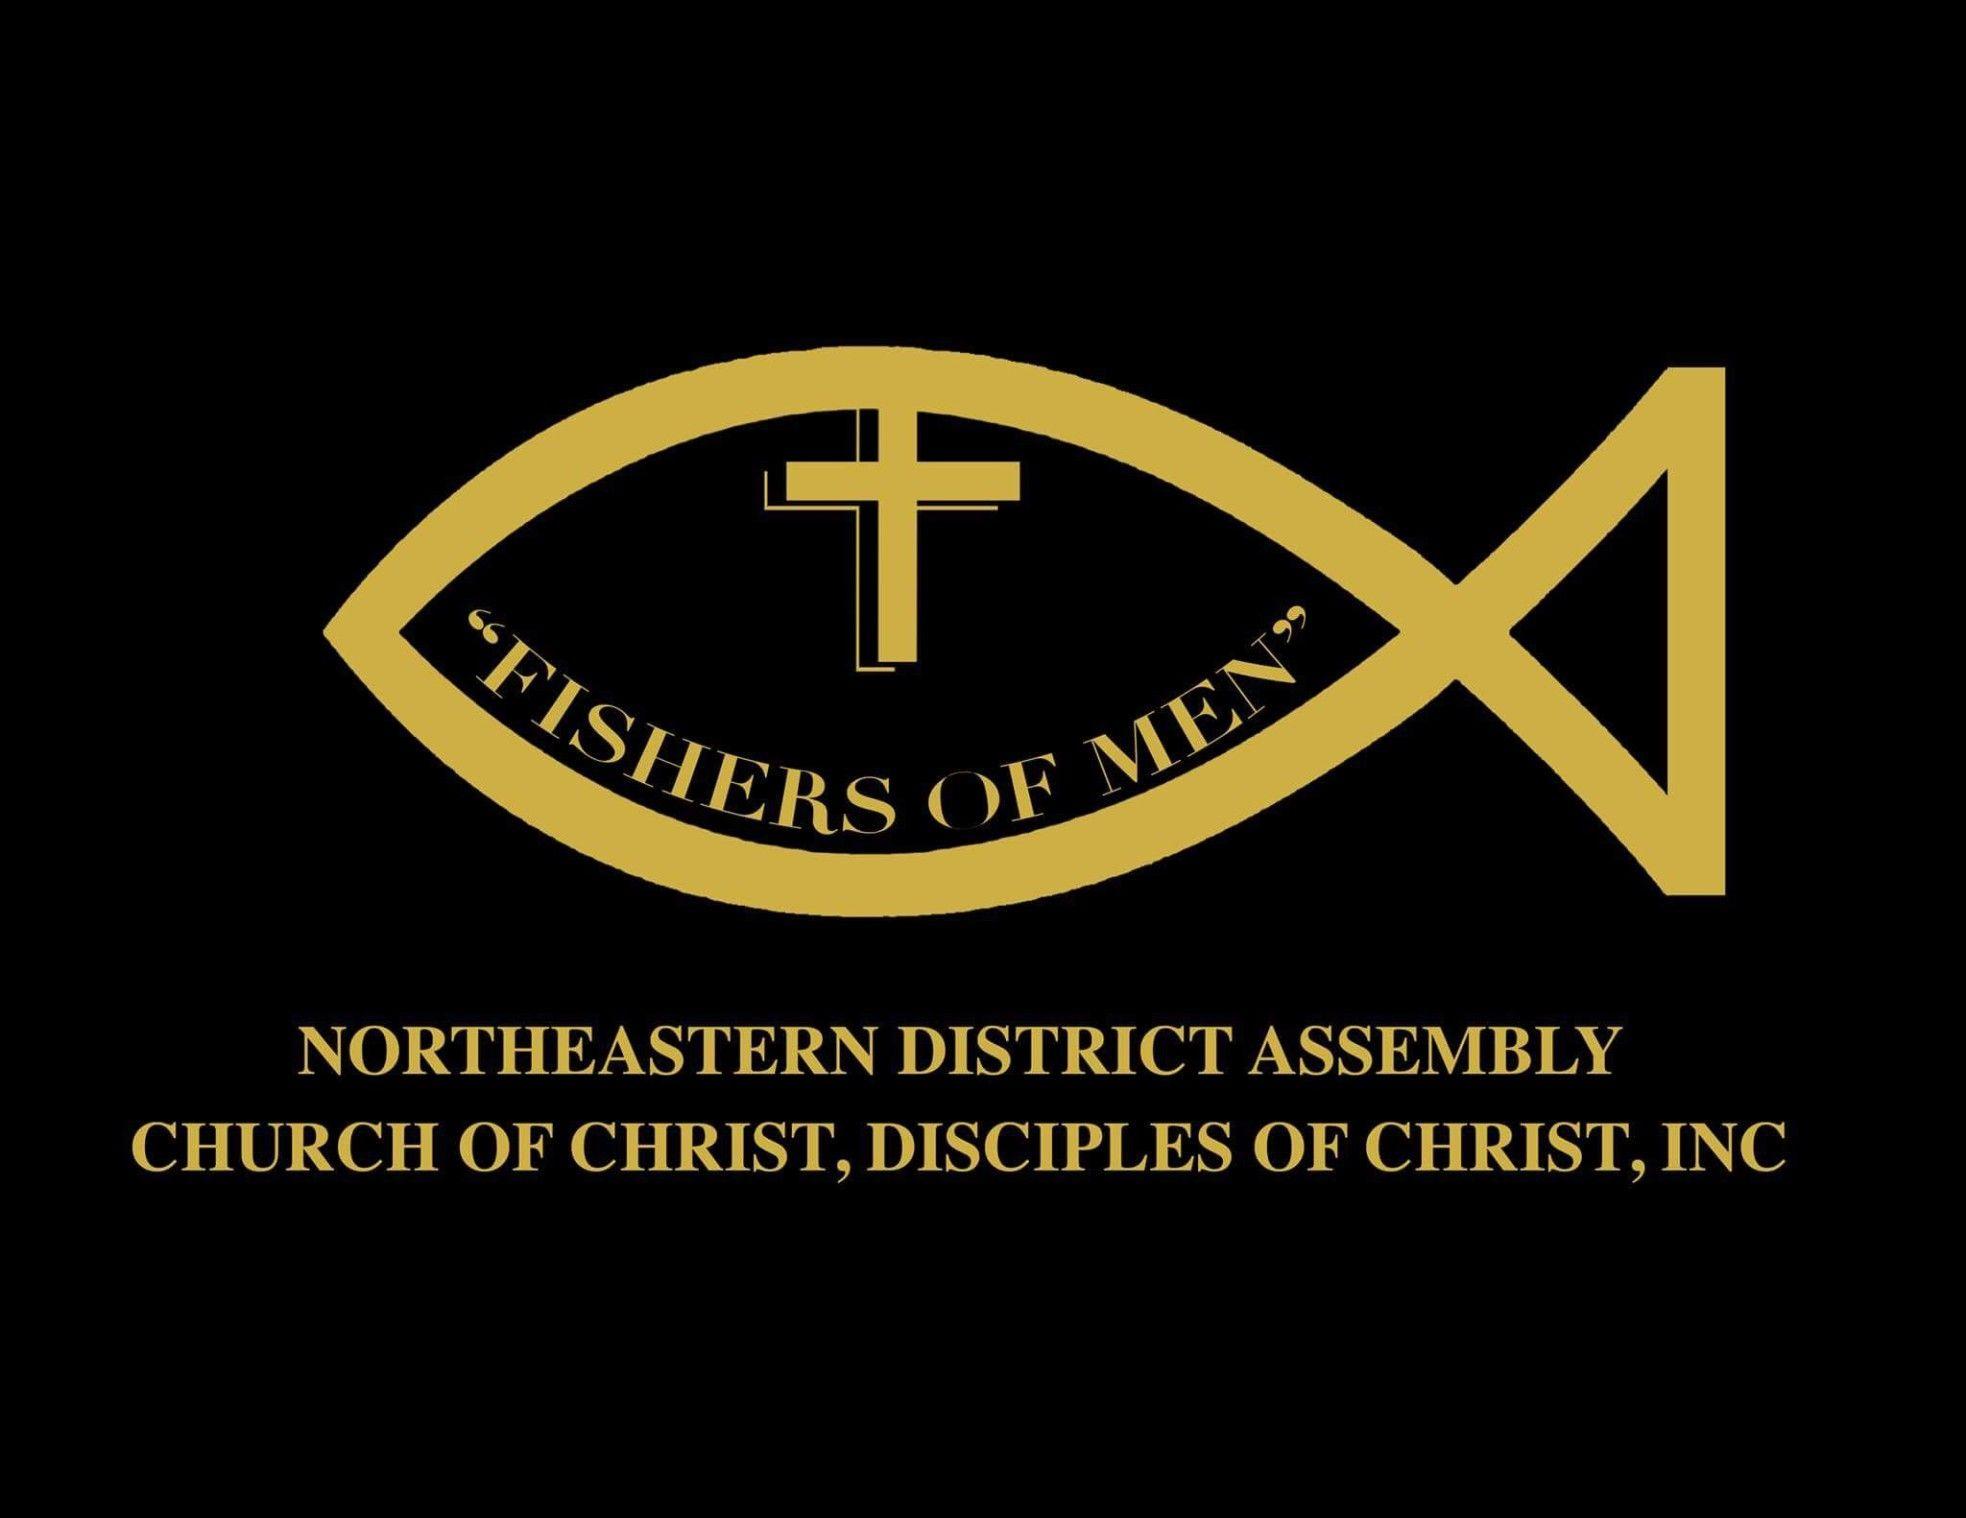 Disciples Church Logo - The Northeastern District Assembly Church of Christ, Disciples of ...